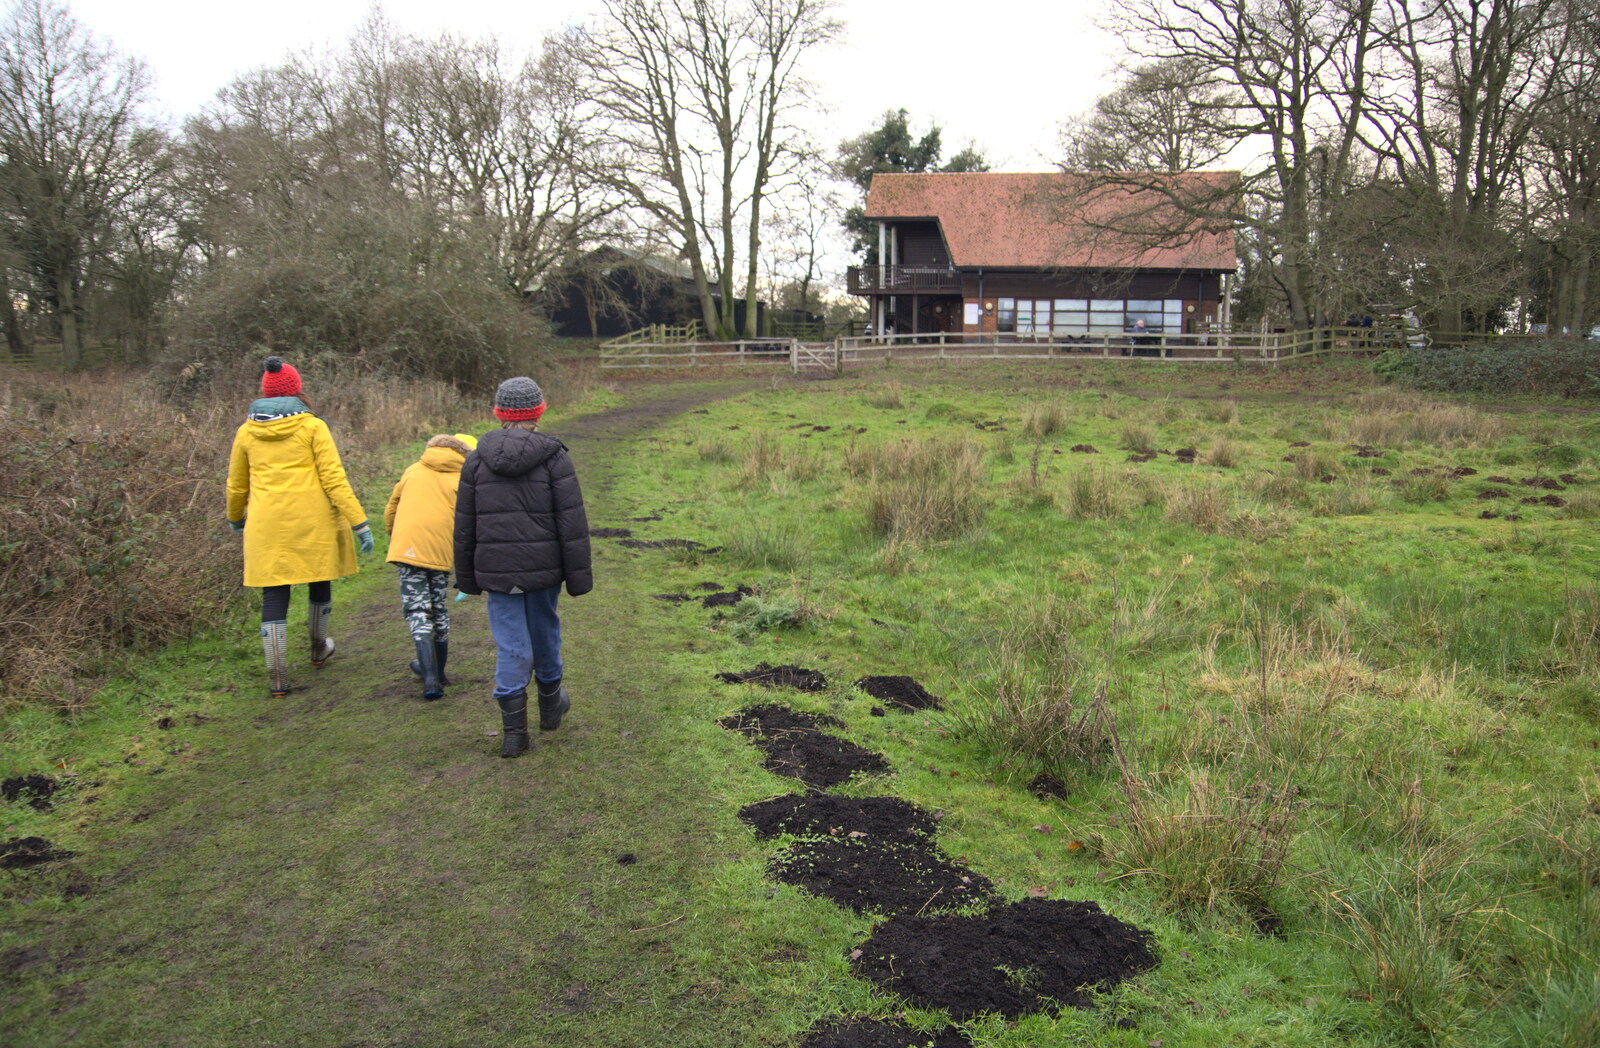 We head back to the visitor's centre from A Walk Around Redgrave and Lopham Fen, Redgrave, Suffolk - 3rd January 2021